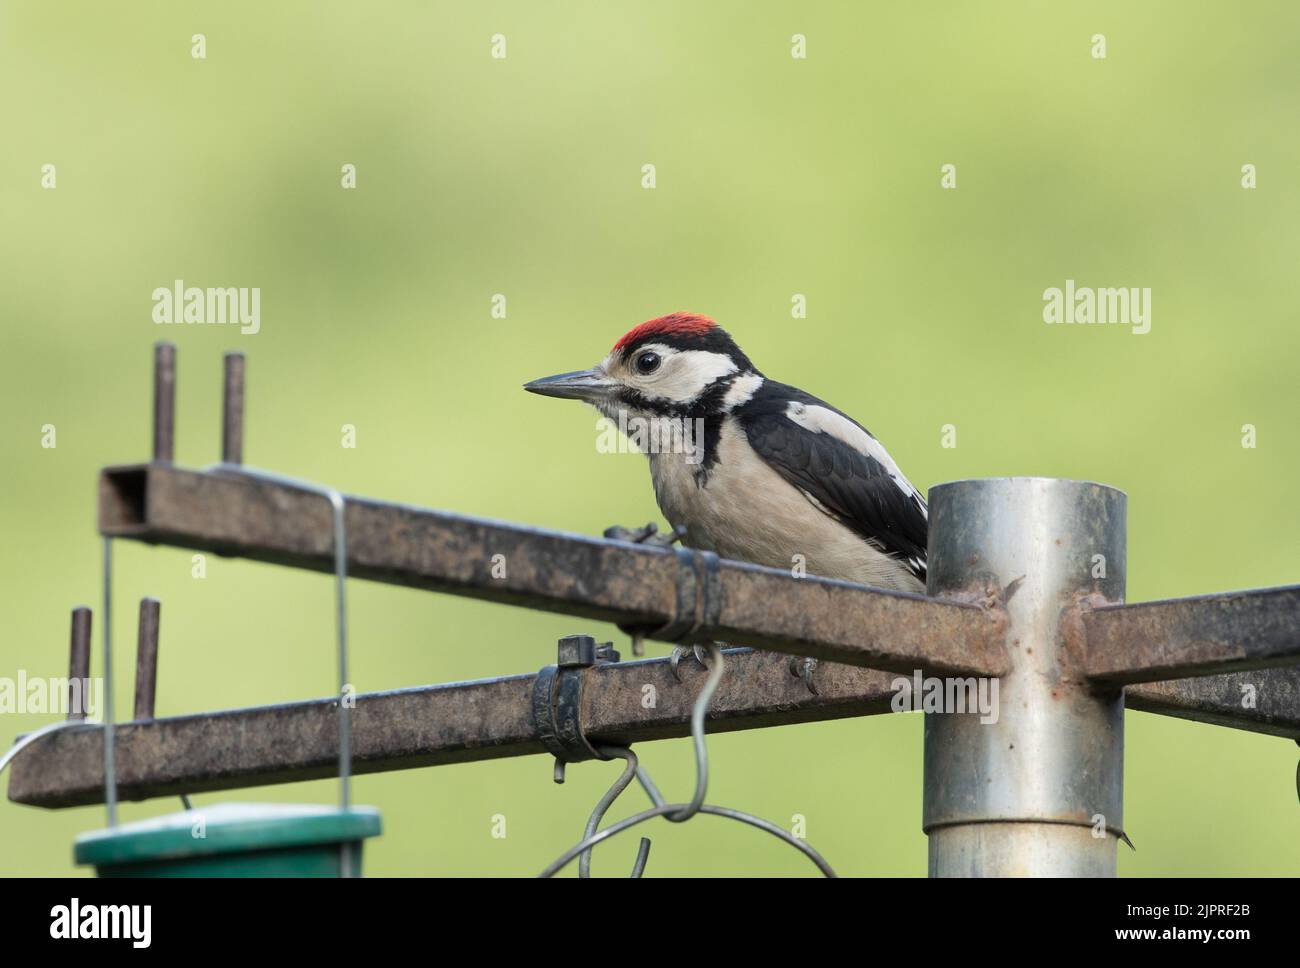 Juvenile Great Spotted Woodpecker on bird feeder Stock Photo